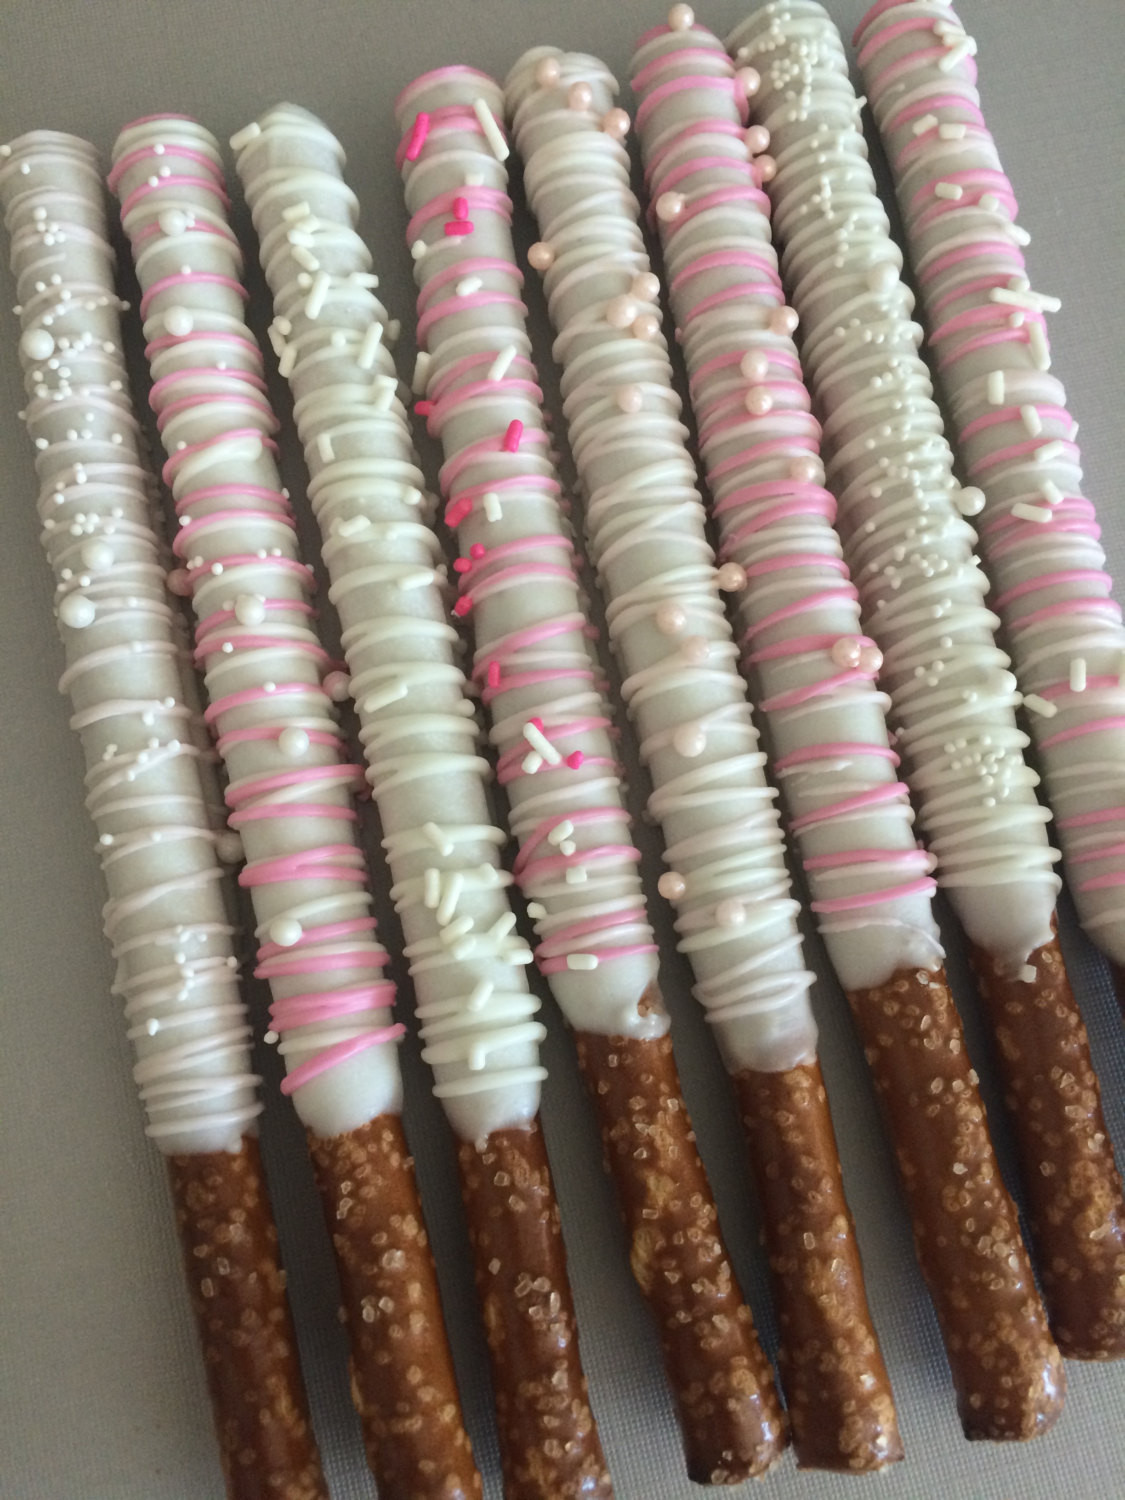 White Chocolate Covered Pretzels
 Pink and White Chocolate Covered Pretzels